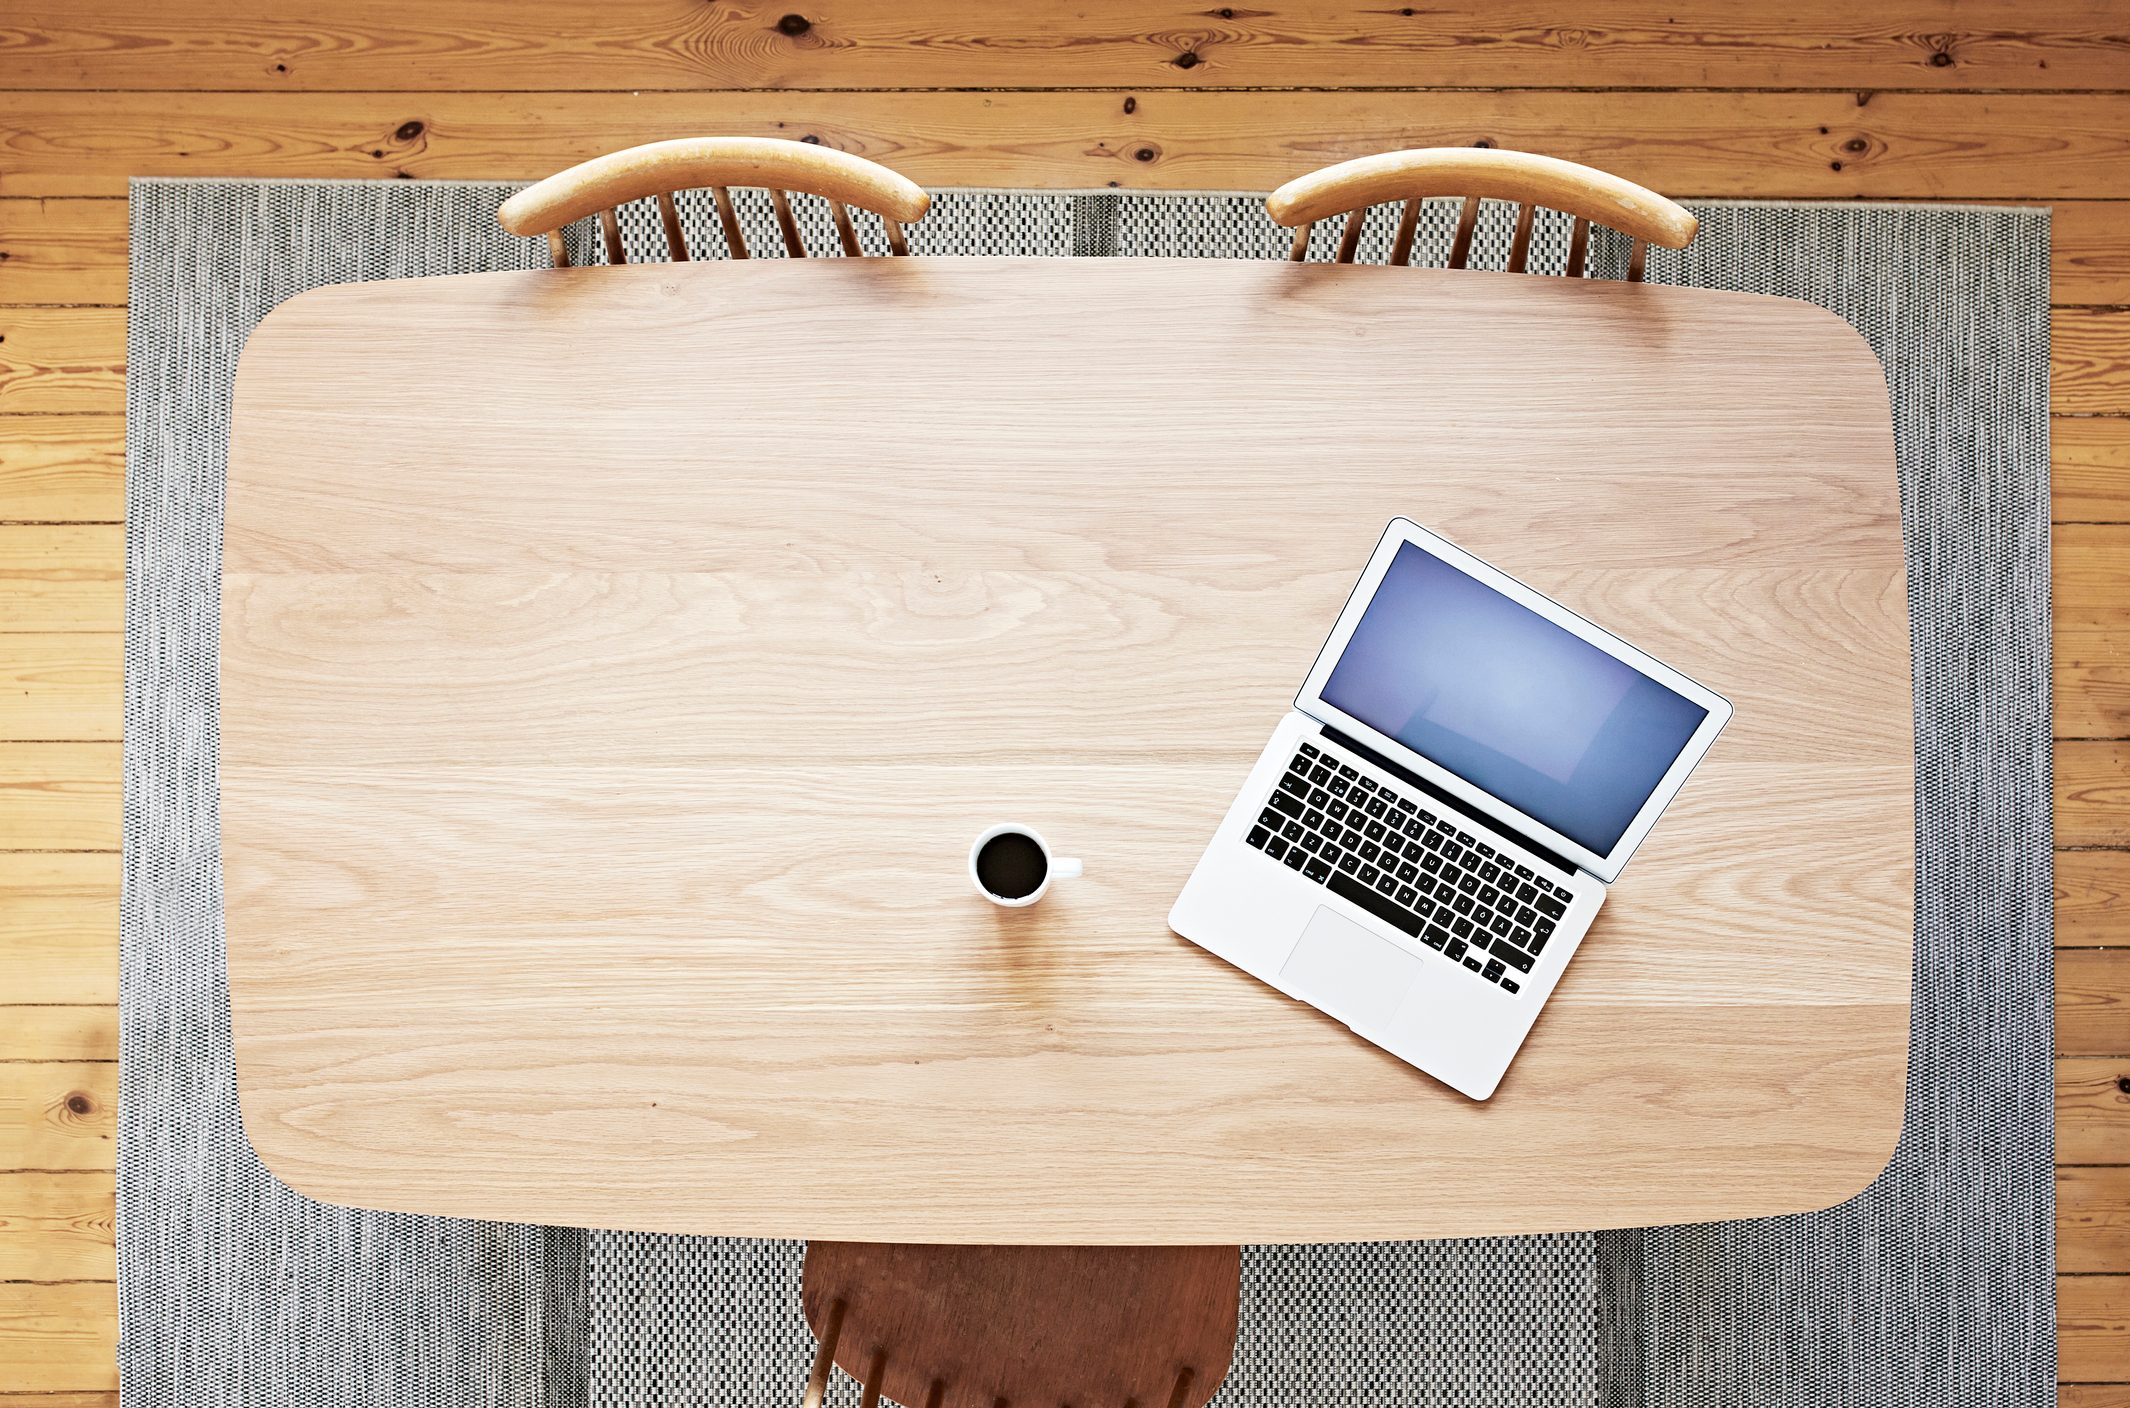 Laptop and coffee on wooden table with wooden chairs surrounding